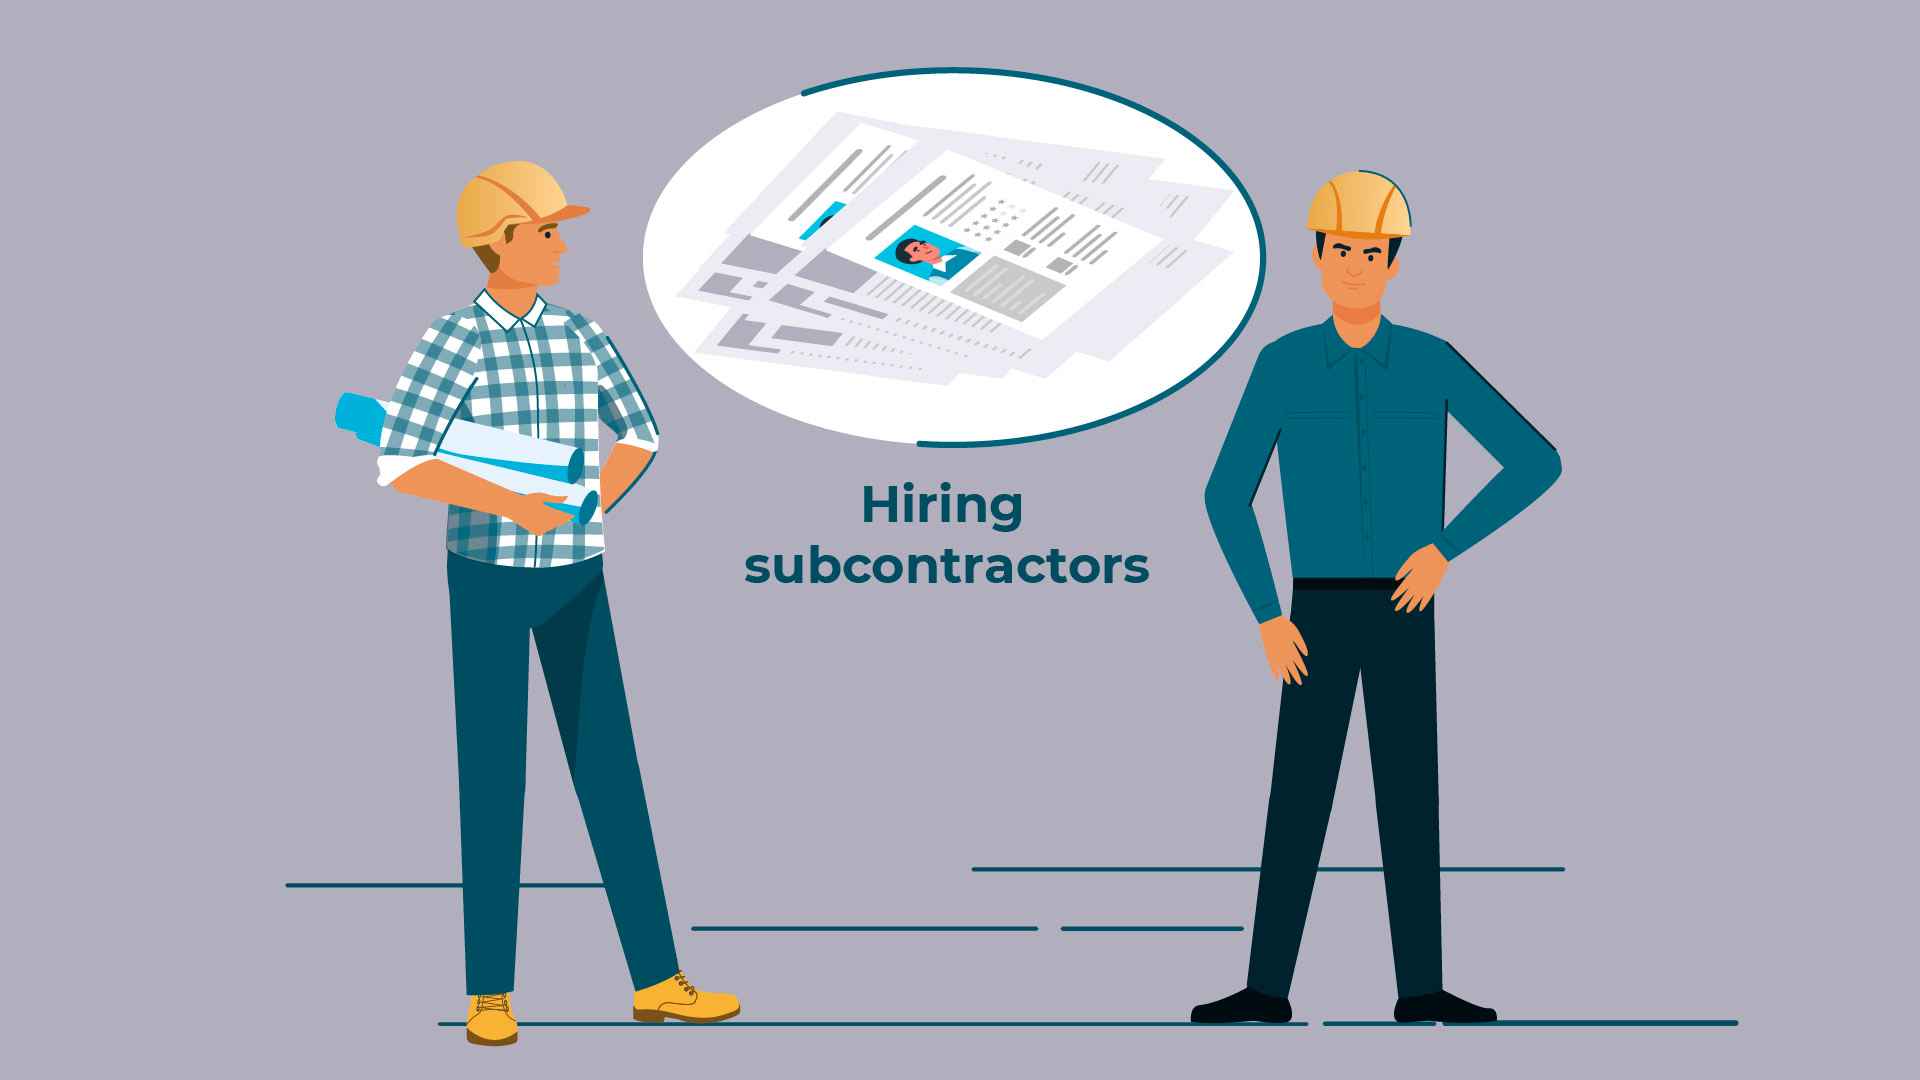 Hiring subcontractors in the video "Employees insurance solution"